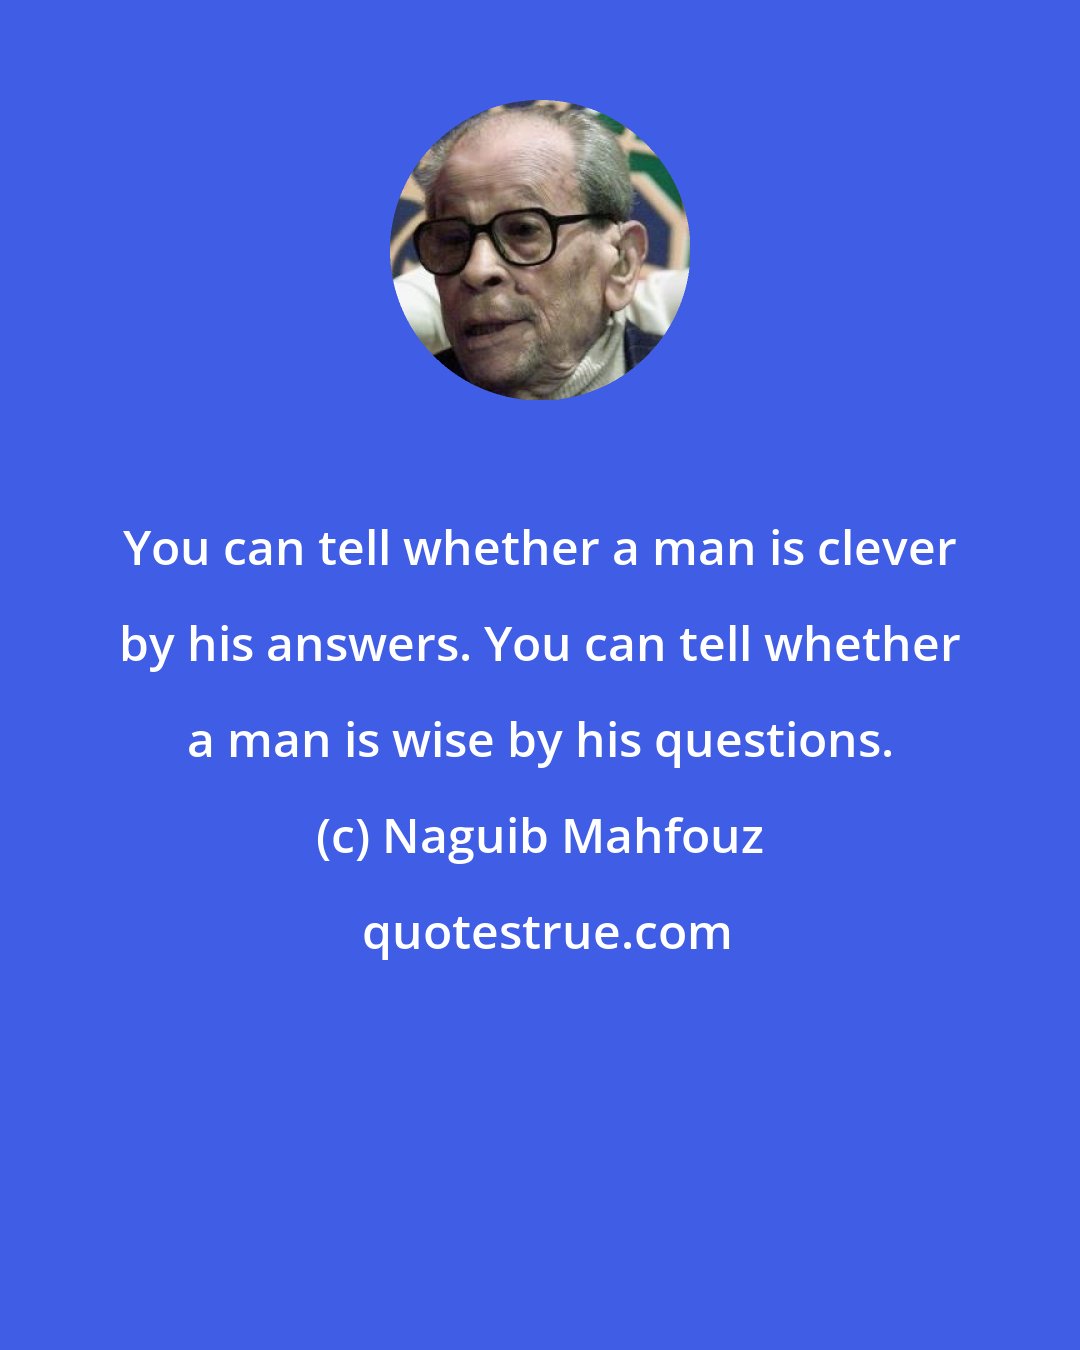 Naguib Mahfouz: You can tell whether a man is clever by his answers. You can tell whether a man is wise by his questions.